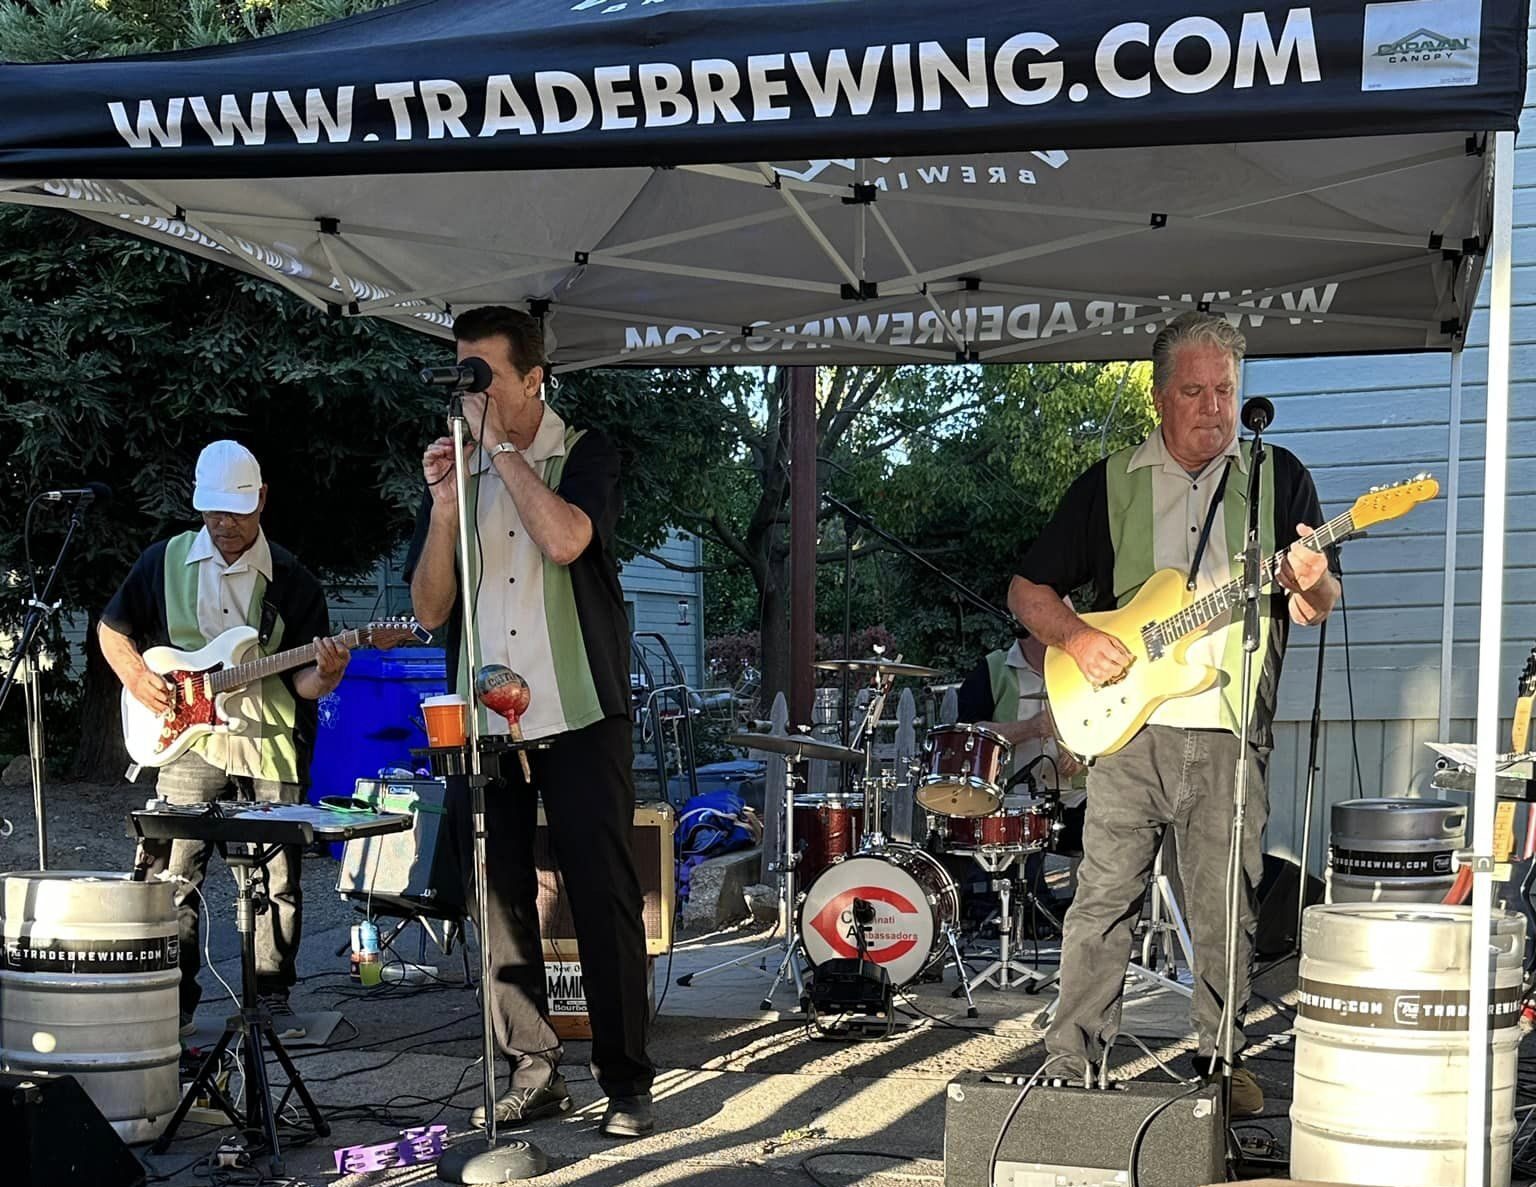 Live Music Sundays at Trade Brewing, Enjoy live music, craft beer, sunshine, and good vibes at Trade Brewing's Live Music Sundays! Every Sunday from 4-7pm, relax on the open-air patio with diverse music by local artists, award-winning beers, and delicious food trucks. Find things to do in Napa and fill your calendar with unforgettable events. Check out our calendar for more!